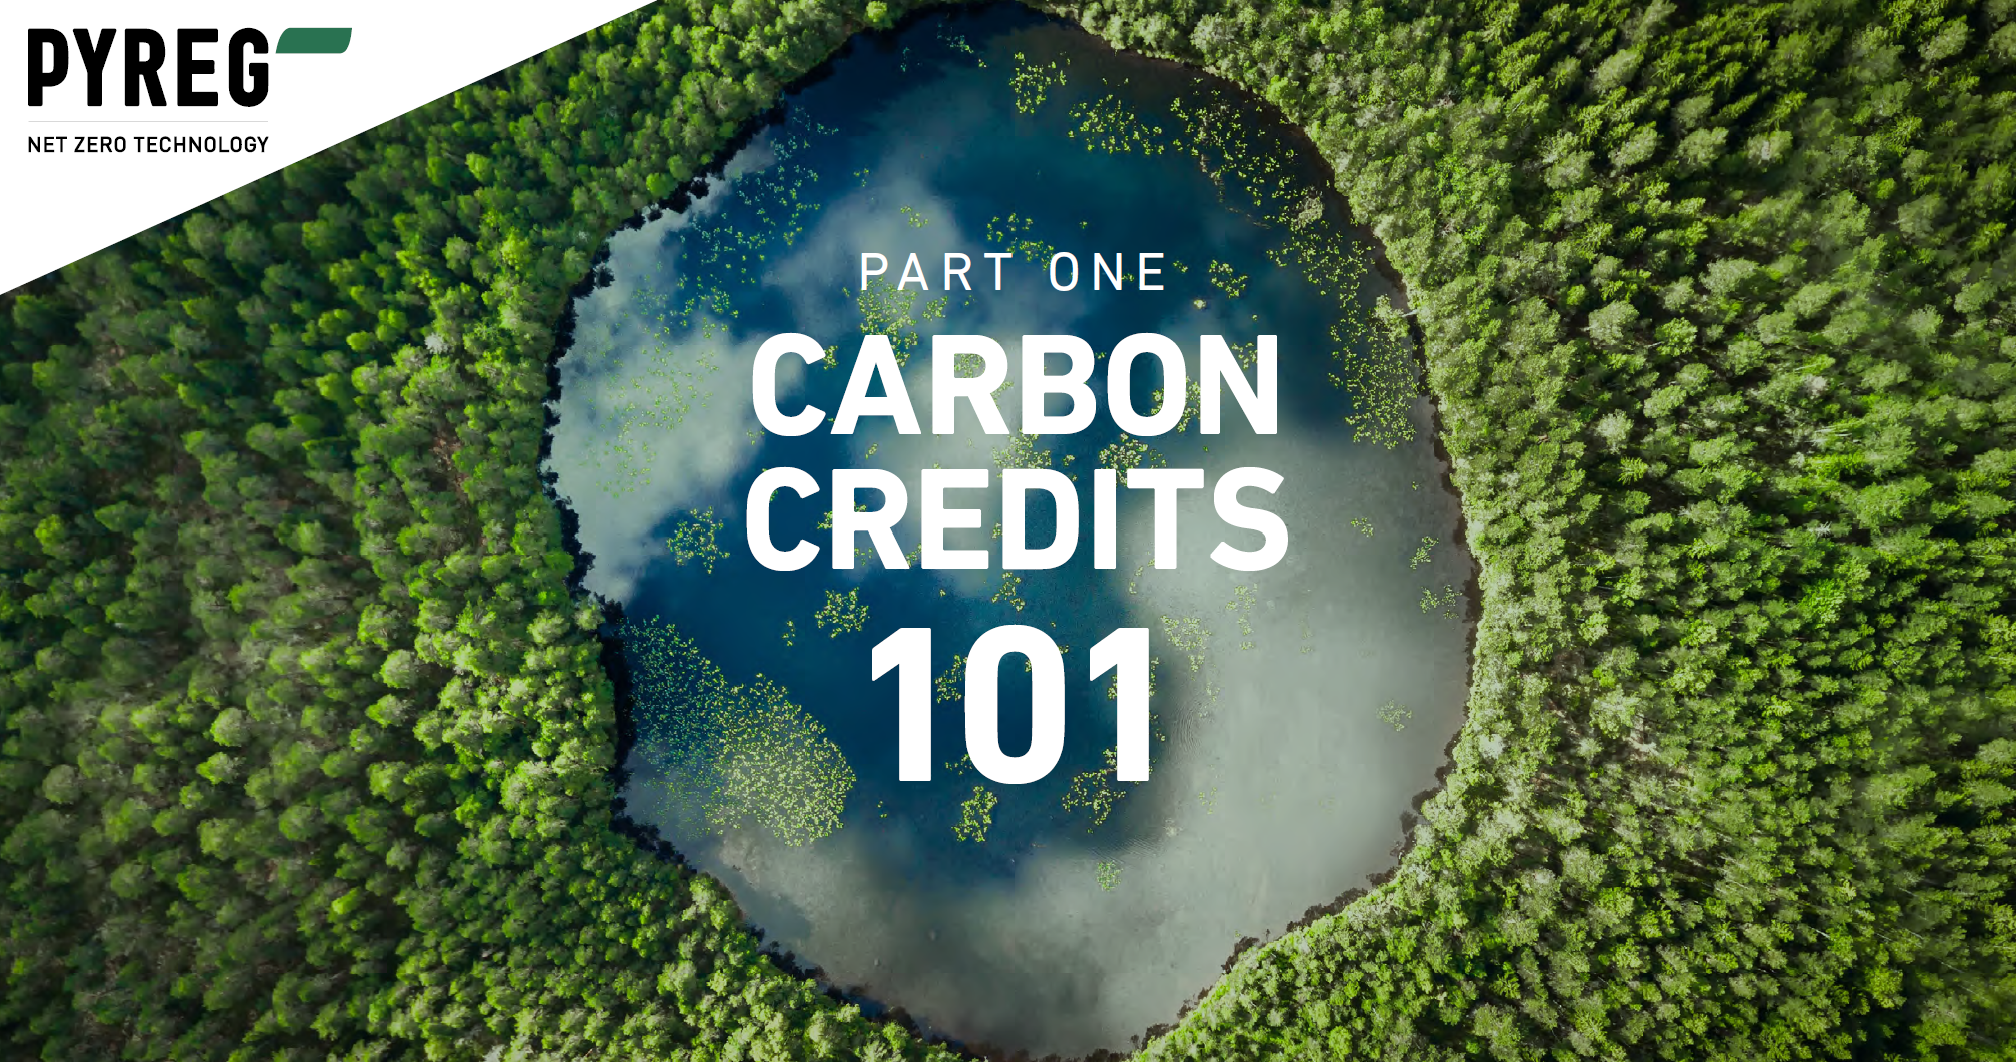 carbon removal credits, explained by PYREG